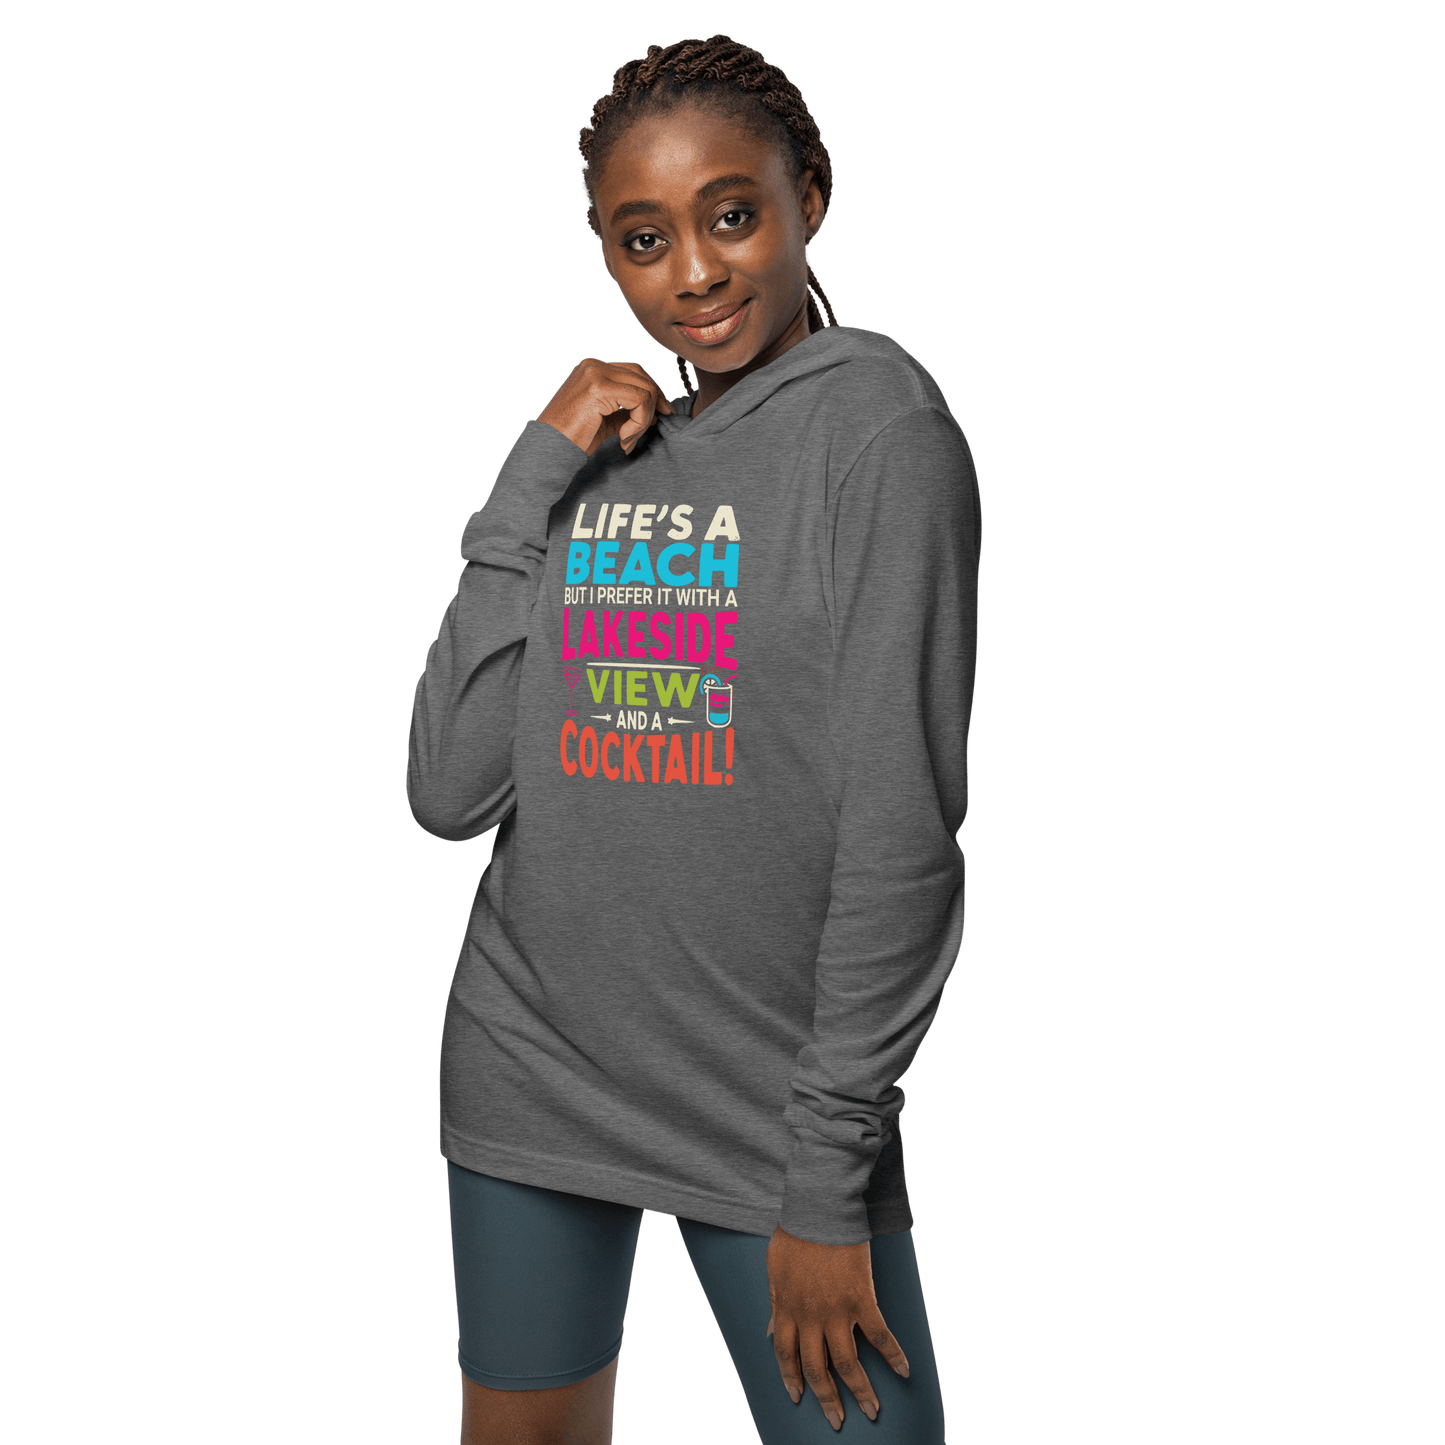 Lightweight hoodie with the phrase "Life's a Beach but I Prefer It with a Lakeside View and a Cocktail" in vibrant colors.